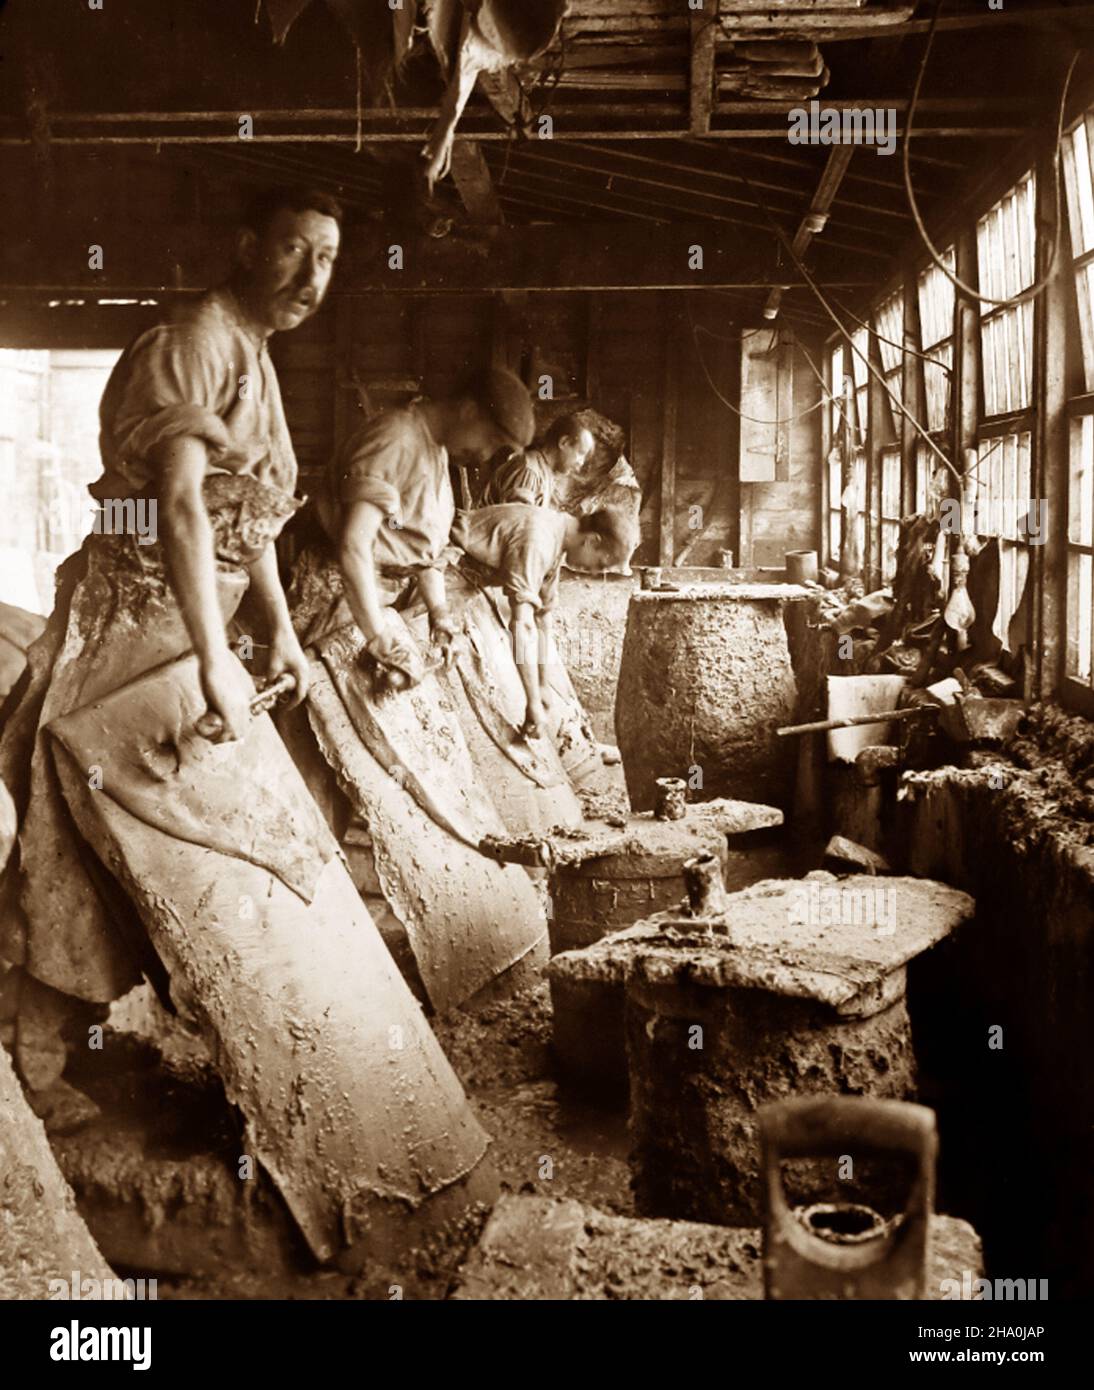 Removing hair from skins, leather production, Victorian period Stock Photo